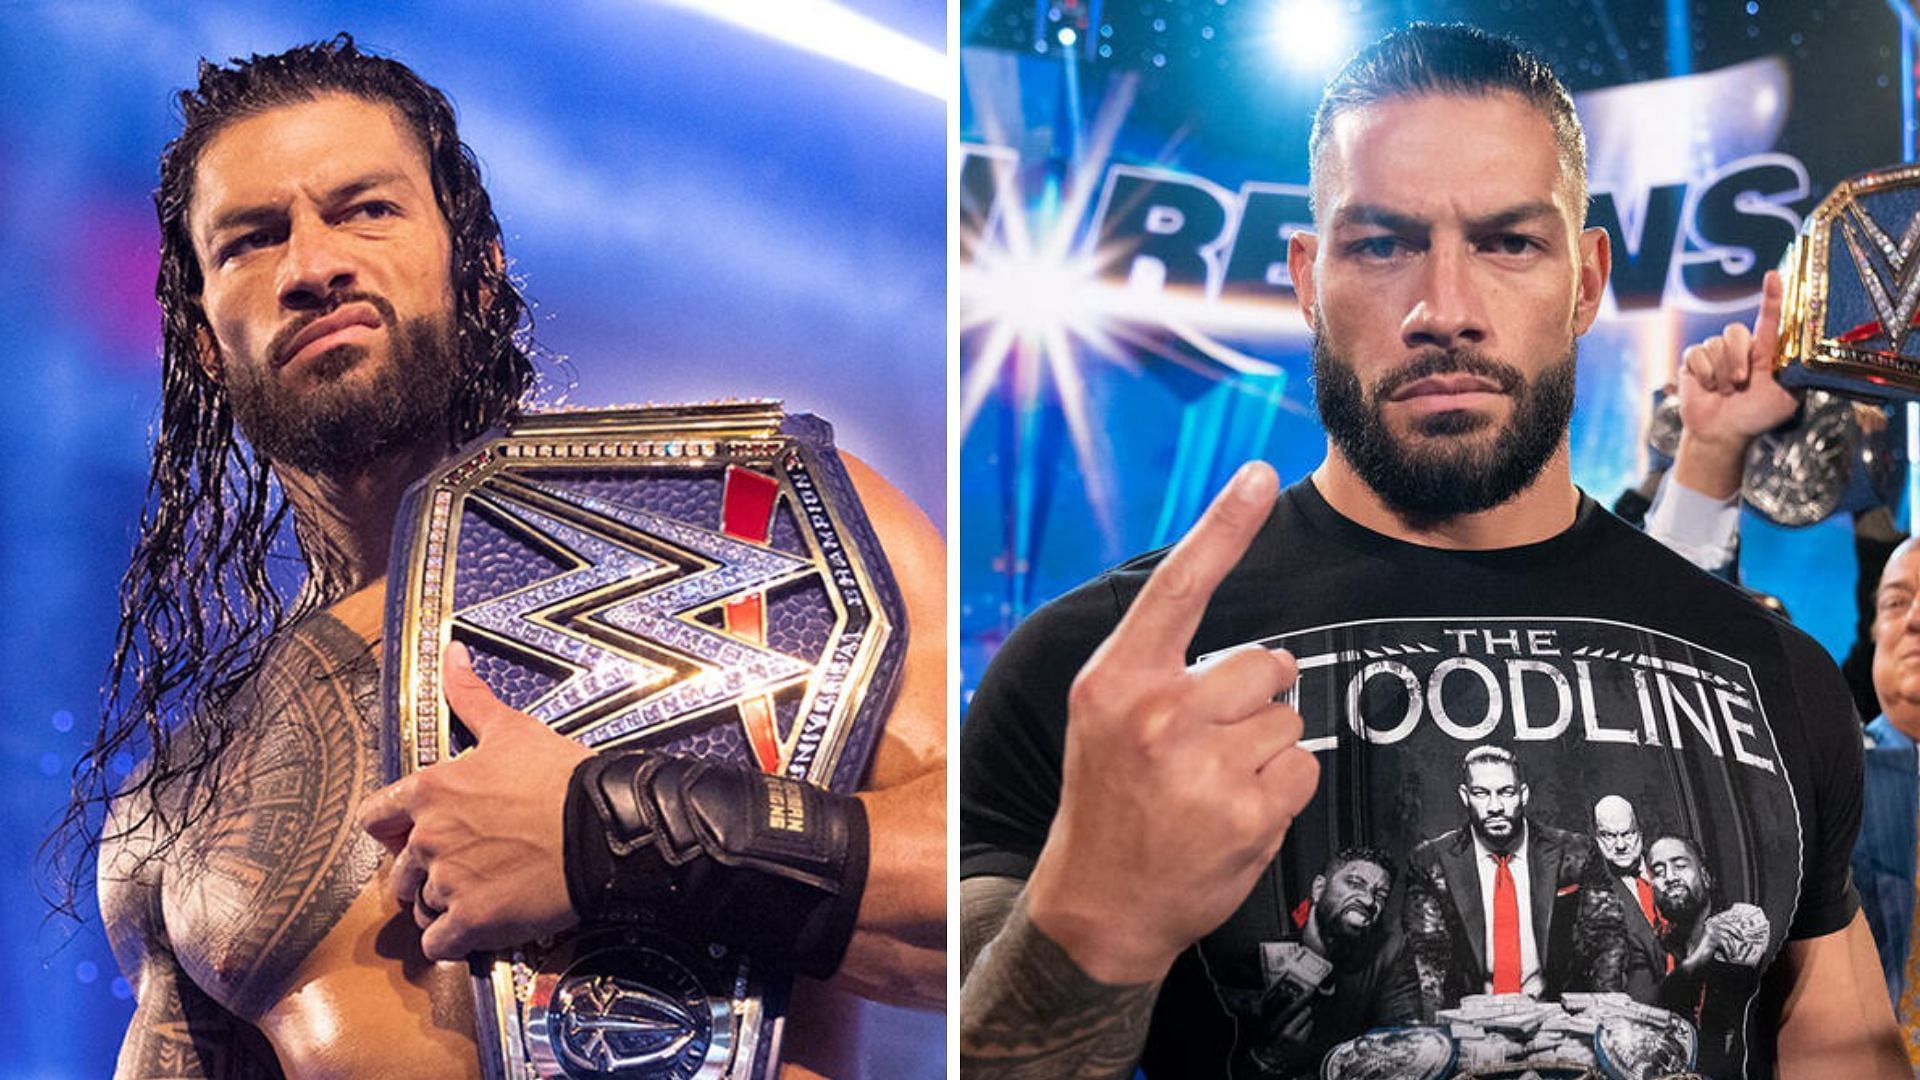 Reigns appeared this past Friday on SmackDown.